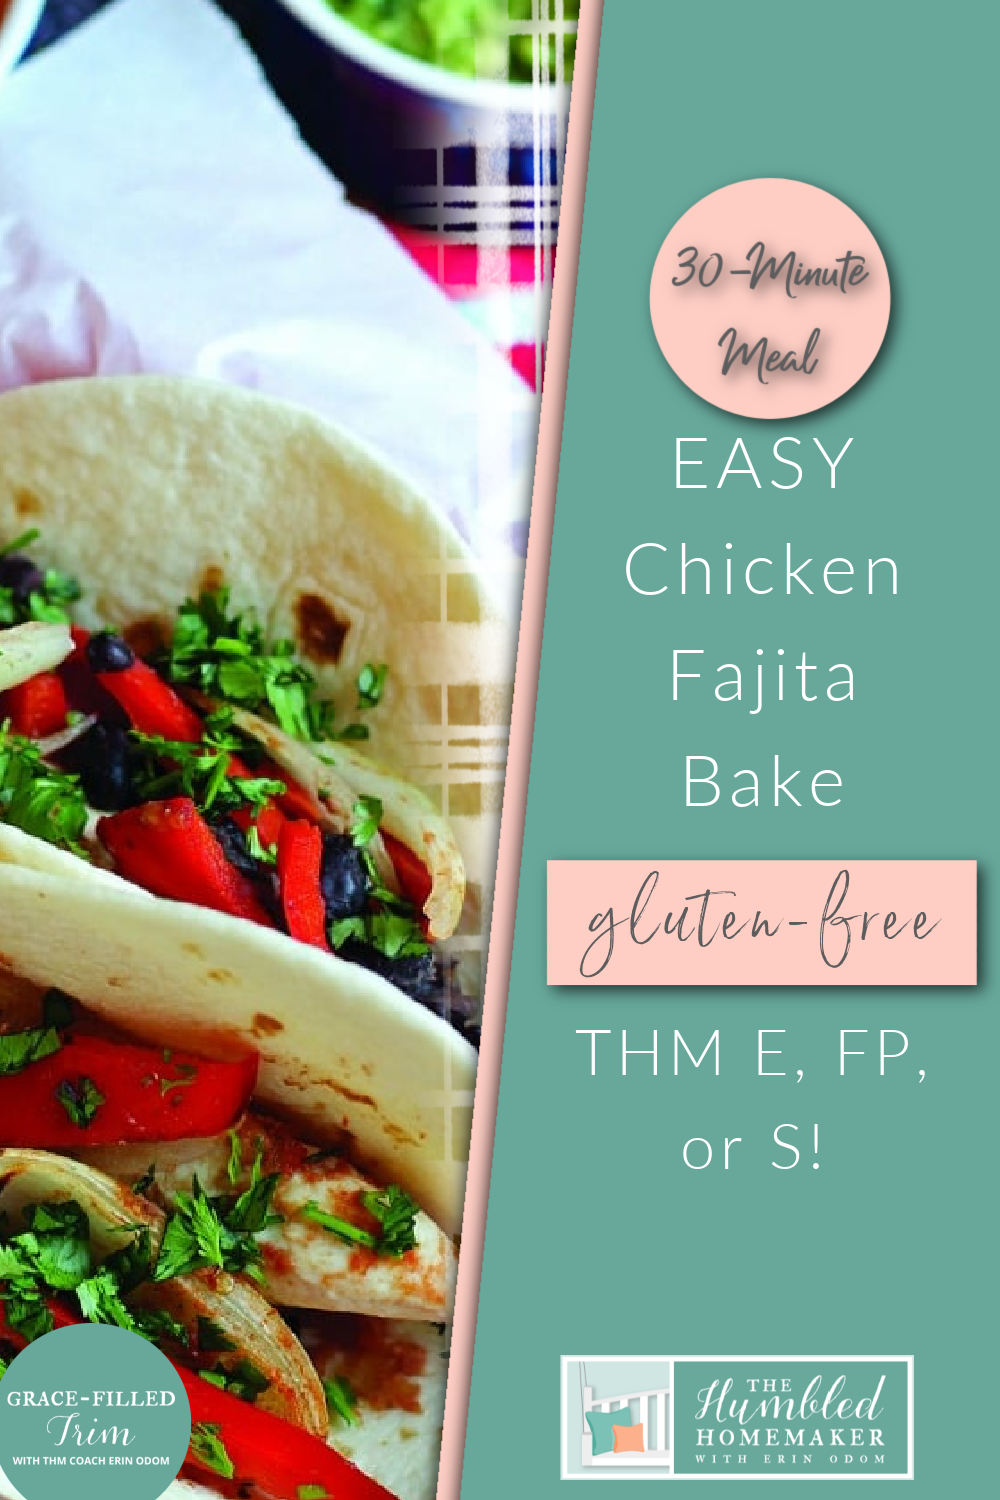 An Unbelievably Easy Chicken Fajita Bake That’s On Your Plate in 30 Minutes Flat {Gluten-Free, THM E, FP, or S}